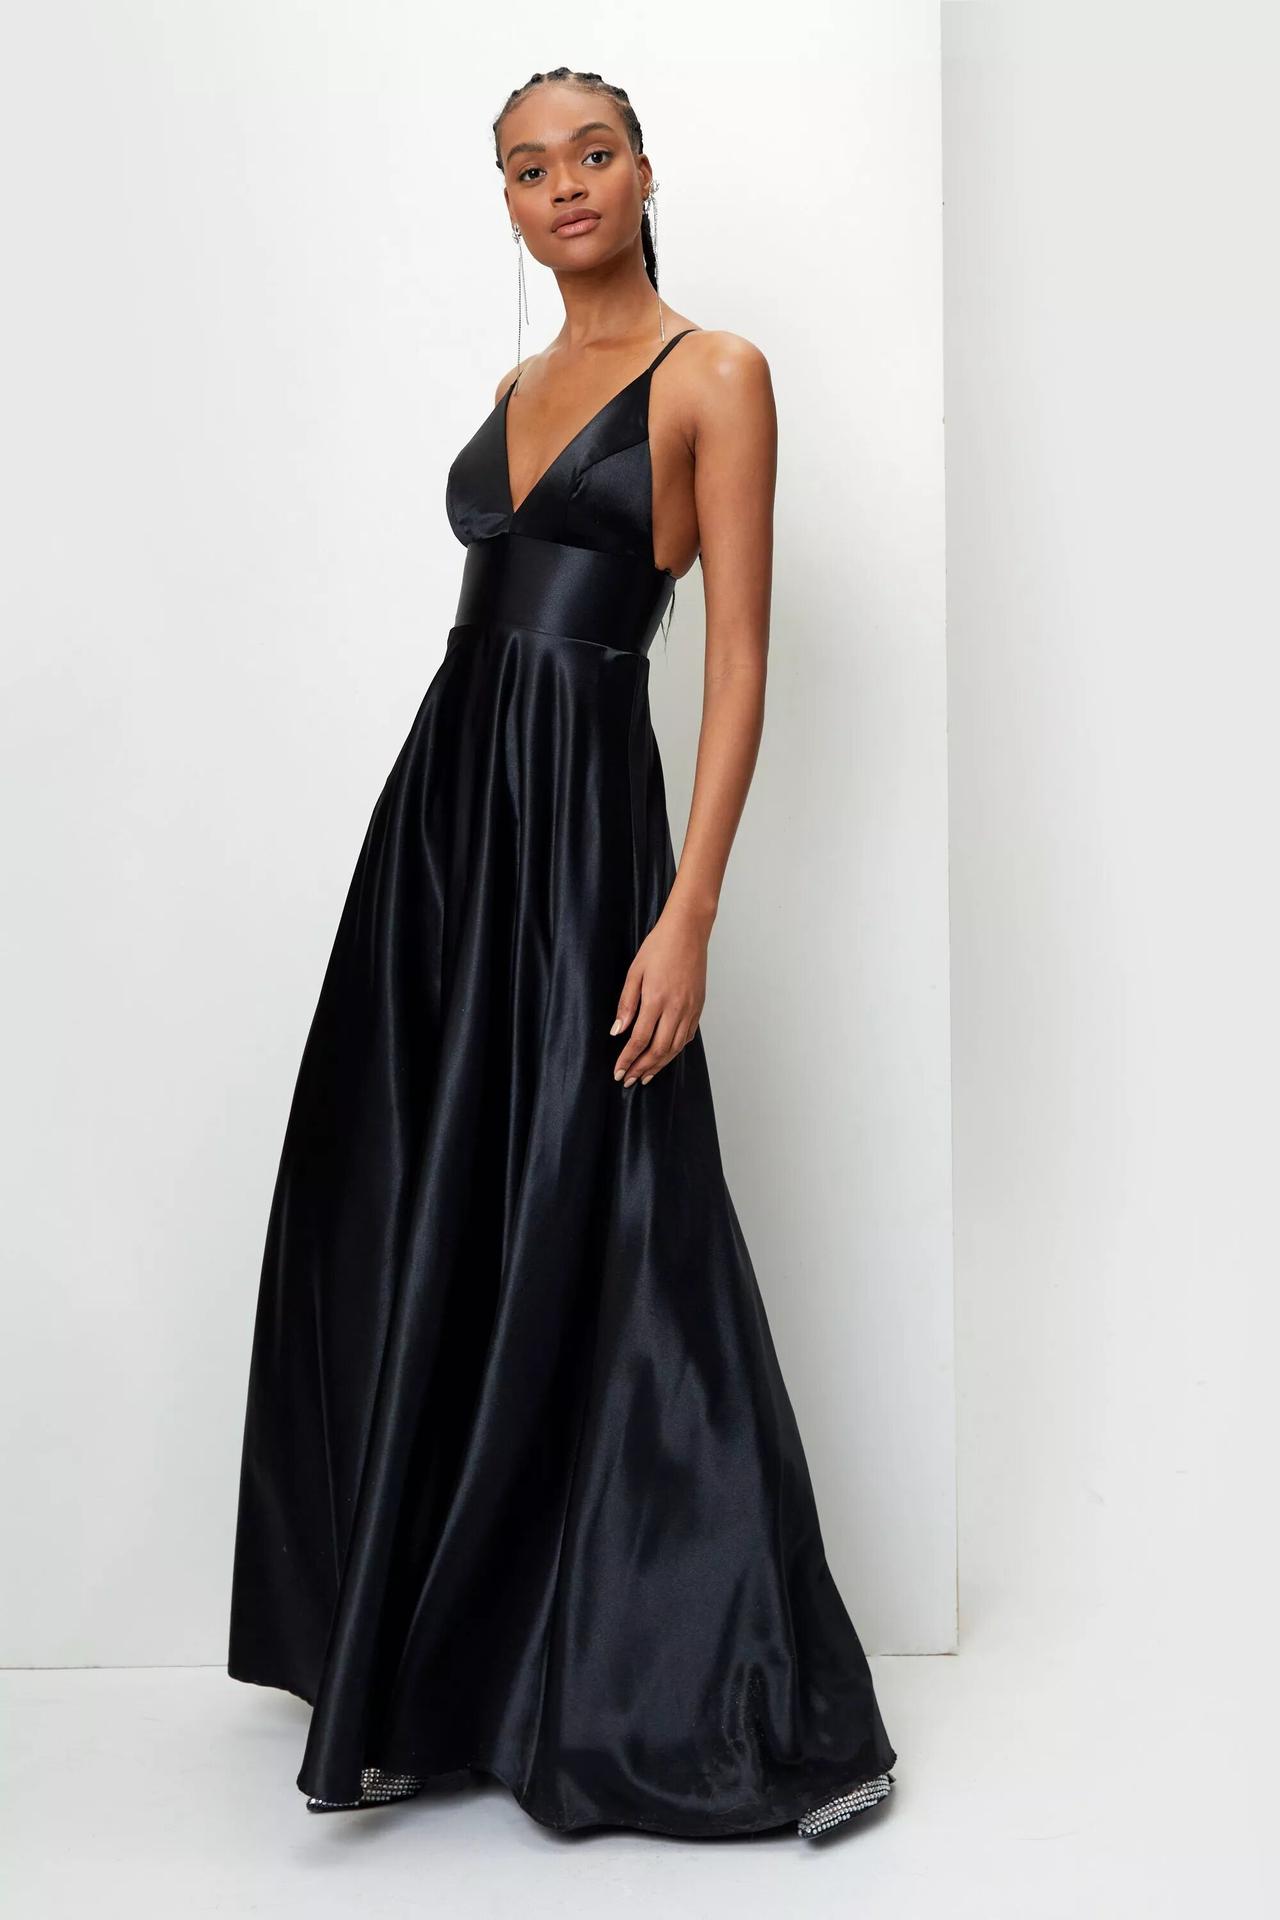 Here's why we love beautiful black bridesmaids dresses… - Inspiration | All  Posts